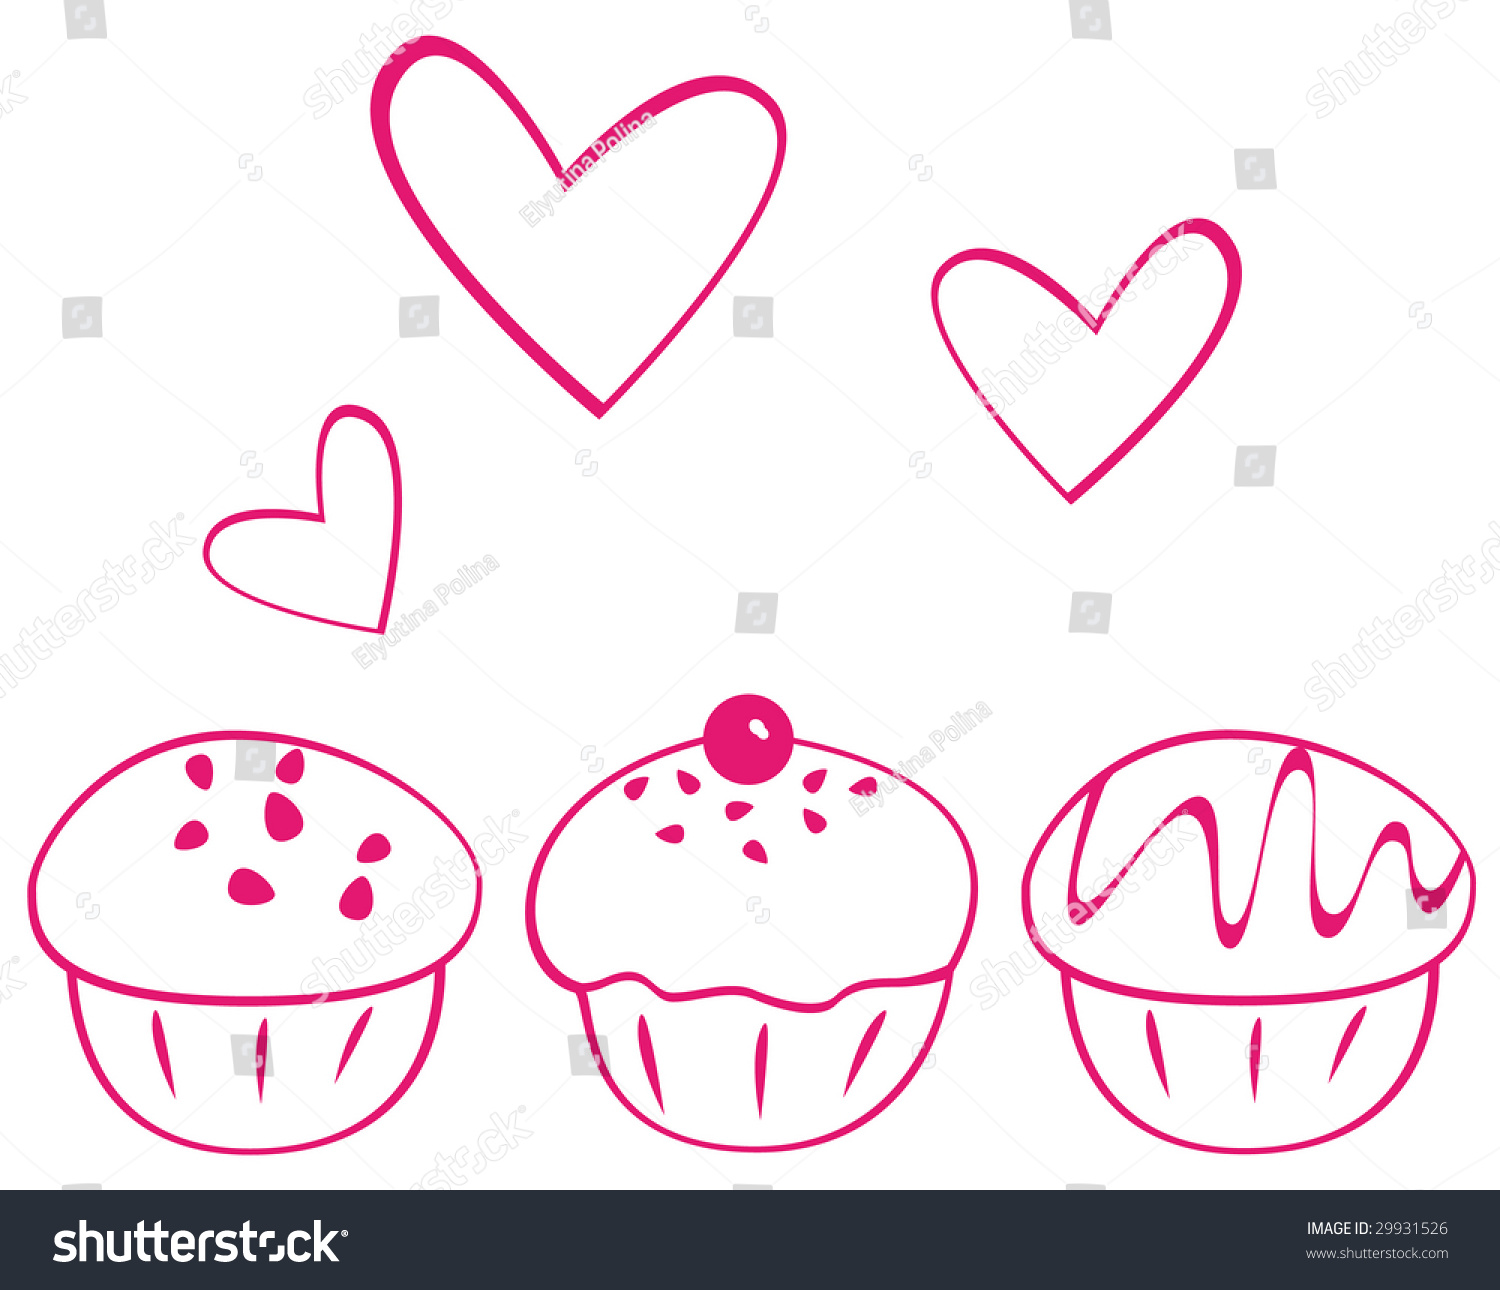 Three Fruitcakes Drawn By Pink Contour Stock Vector 29931526 - Shutterstock